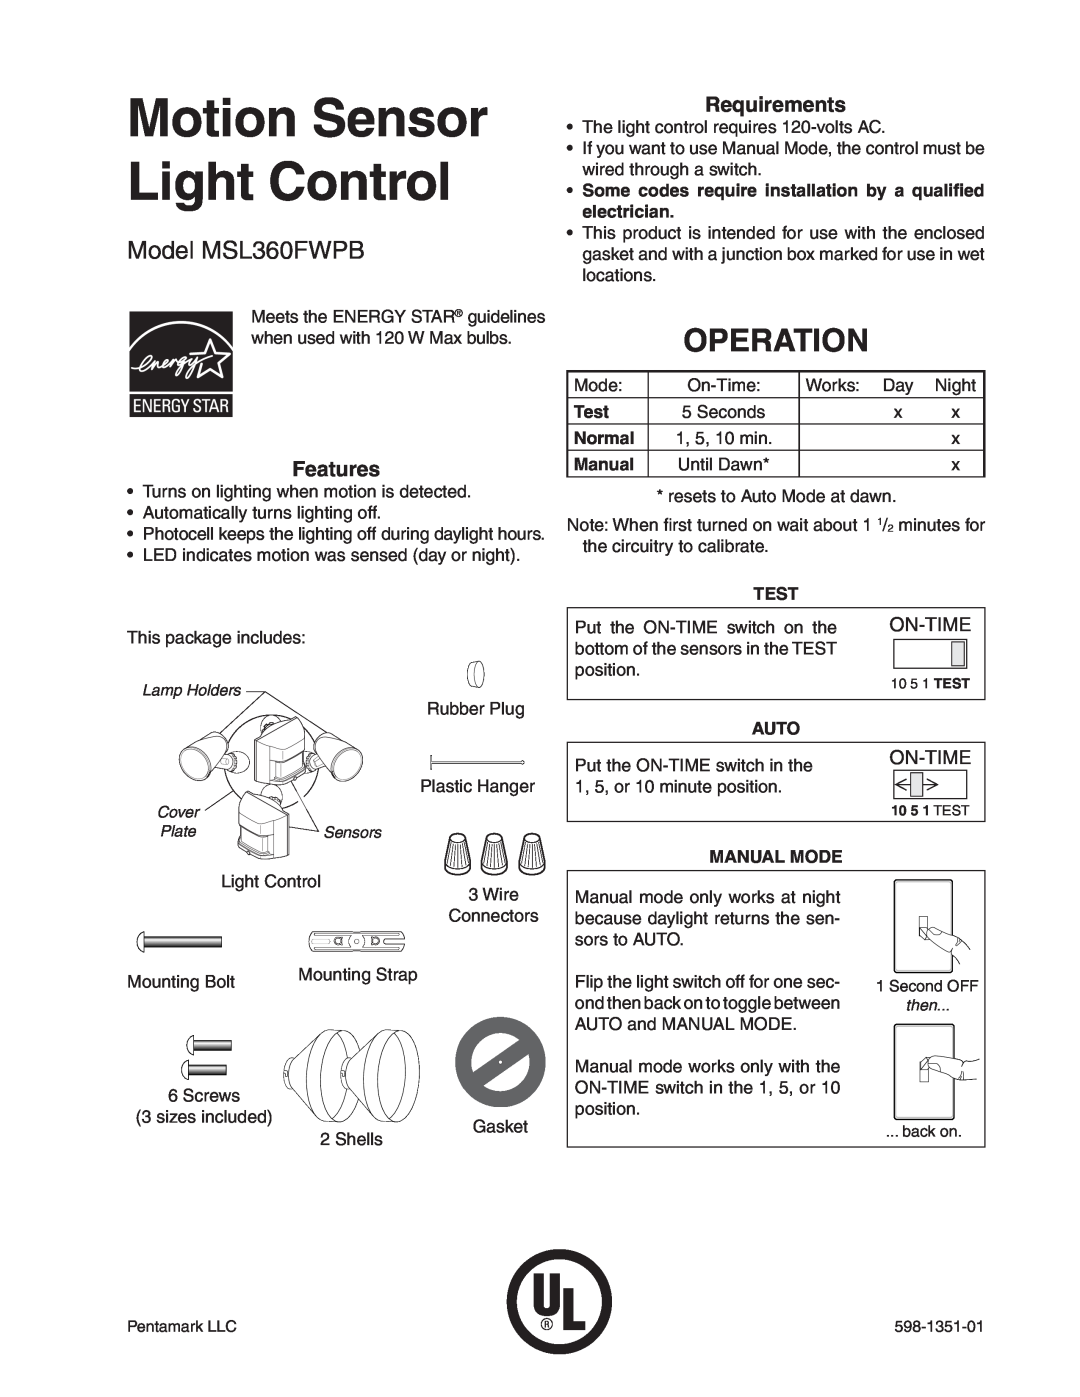 Heath Zenith manual Motion Sensor Light Control, Operation, Model MSL360FWPB, Features, Requirements, On-Time 